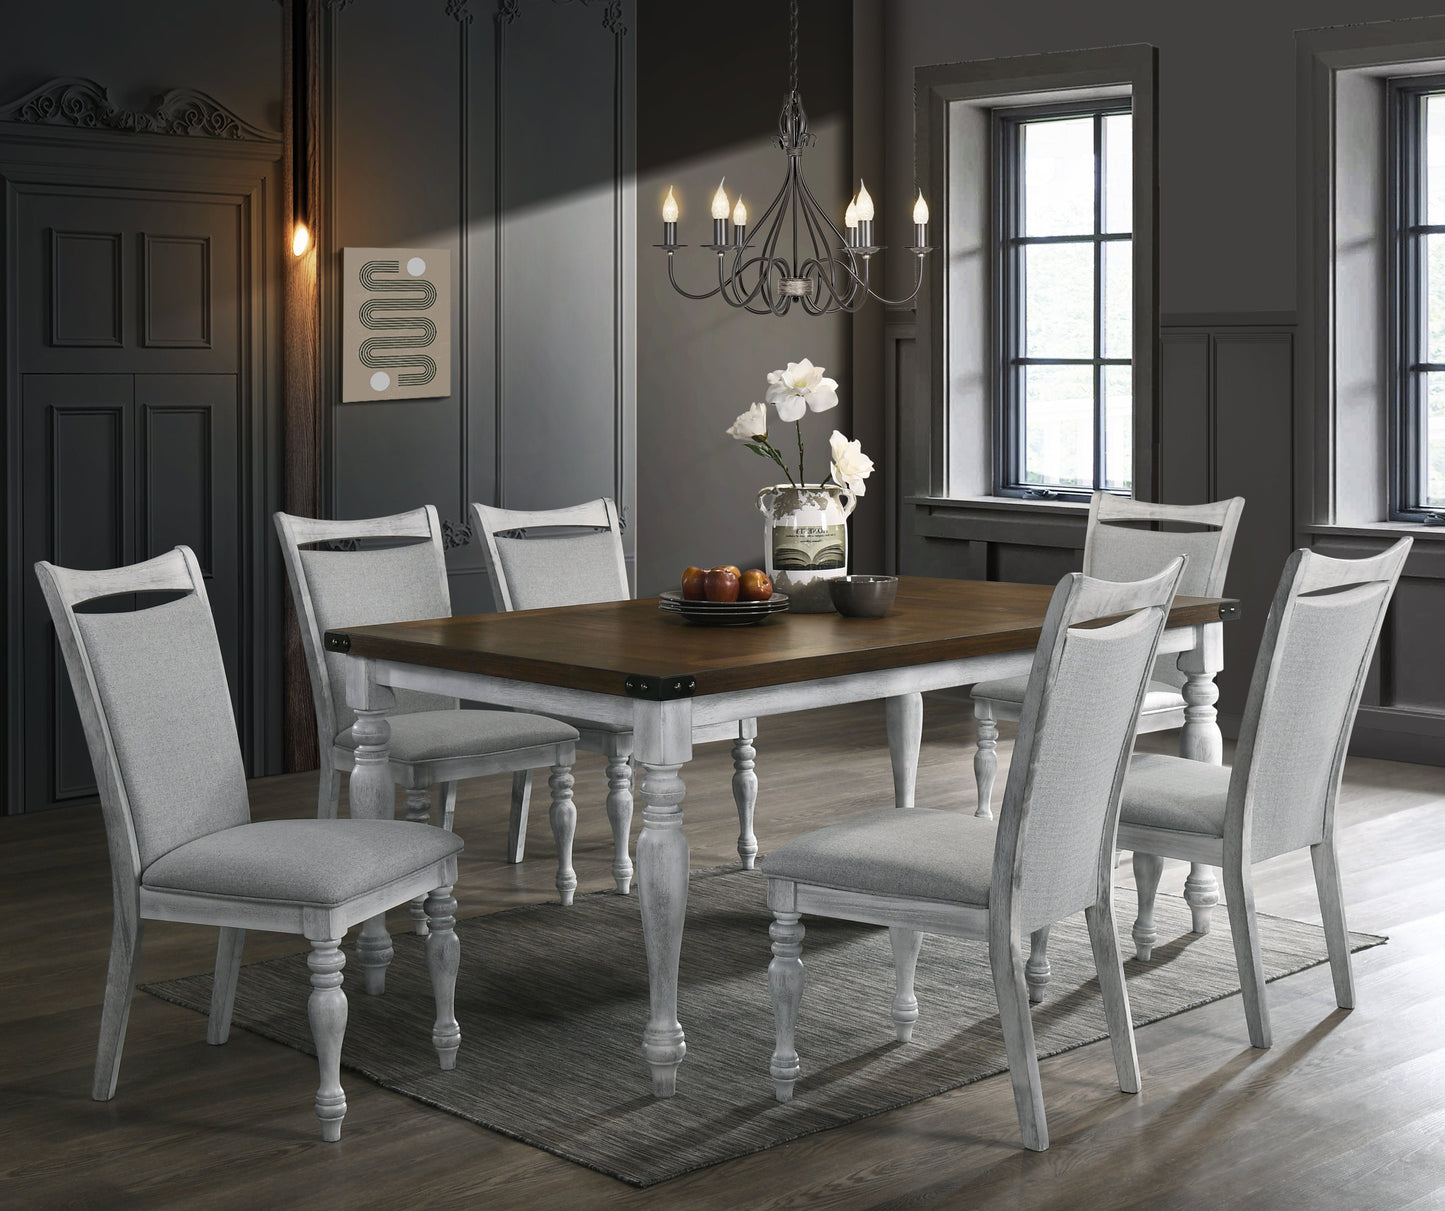 Salines 7 Piece Dining Table Set with 6 Upholstered Chairs, Rustic White and Oak